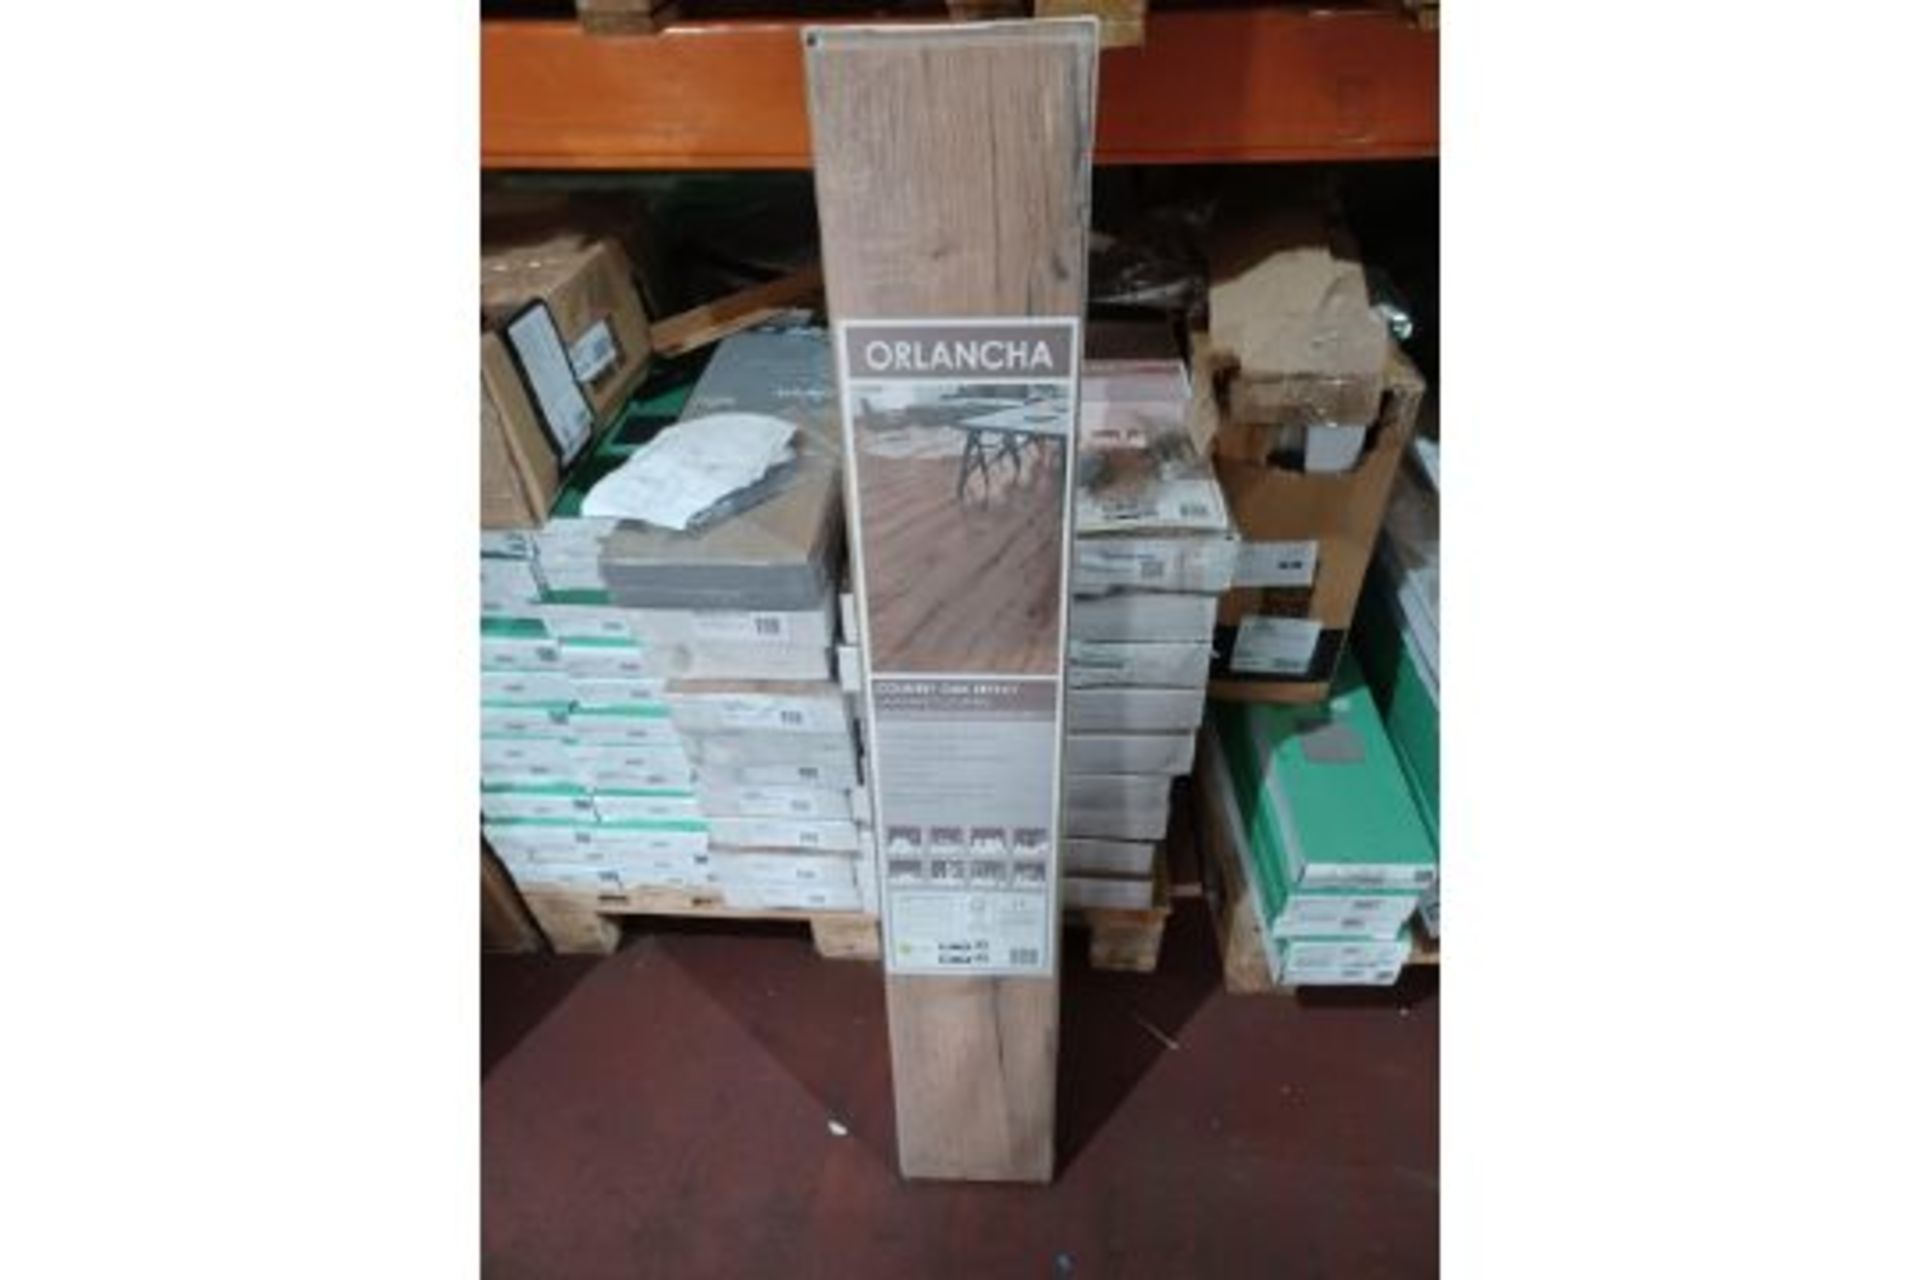 9 x PACKS OF Orlancha Oak effect Laminate Flooring. Each pack contains 1.746m2, giving this lot a